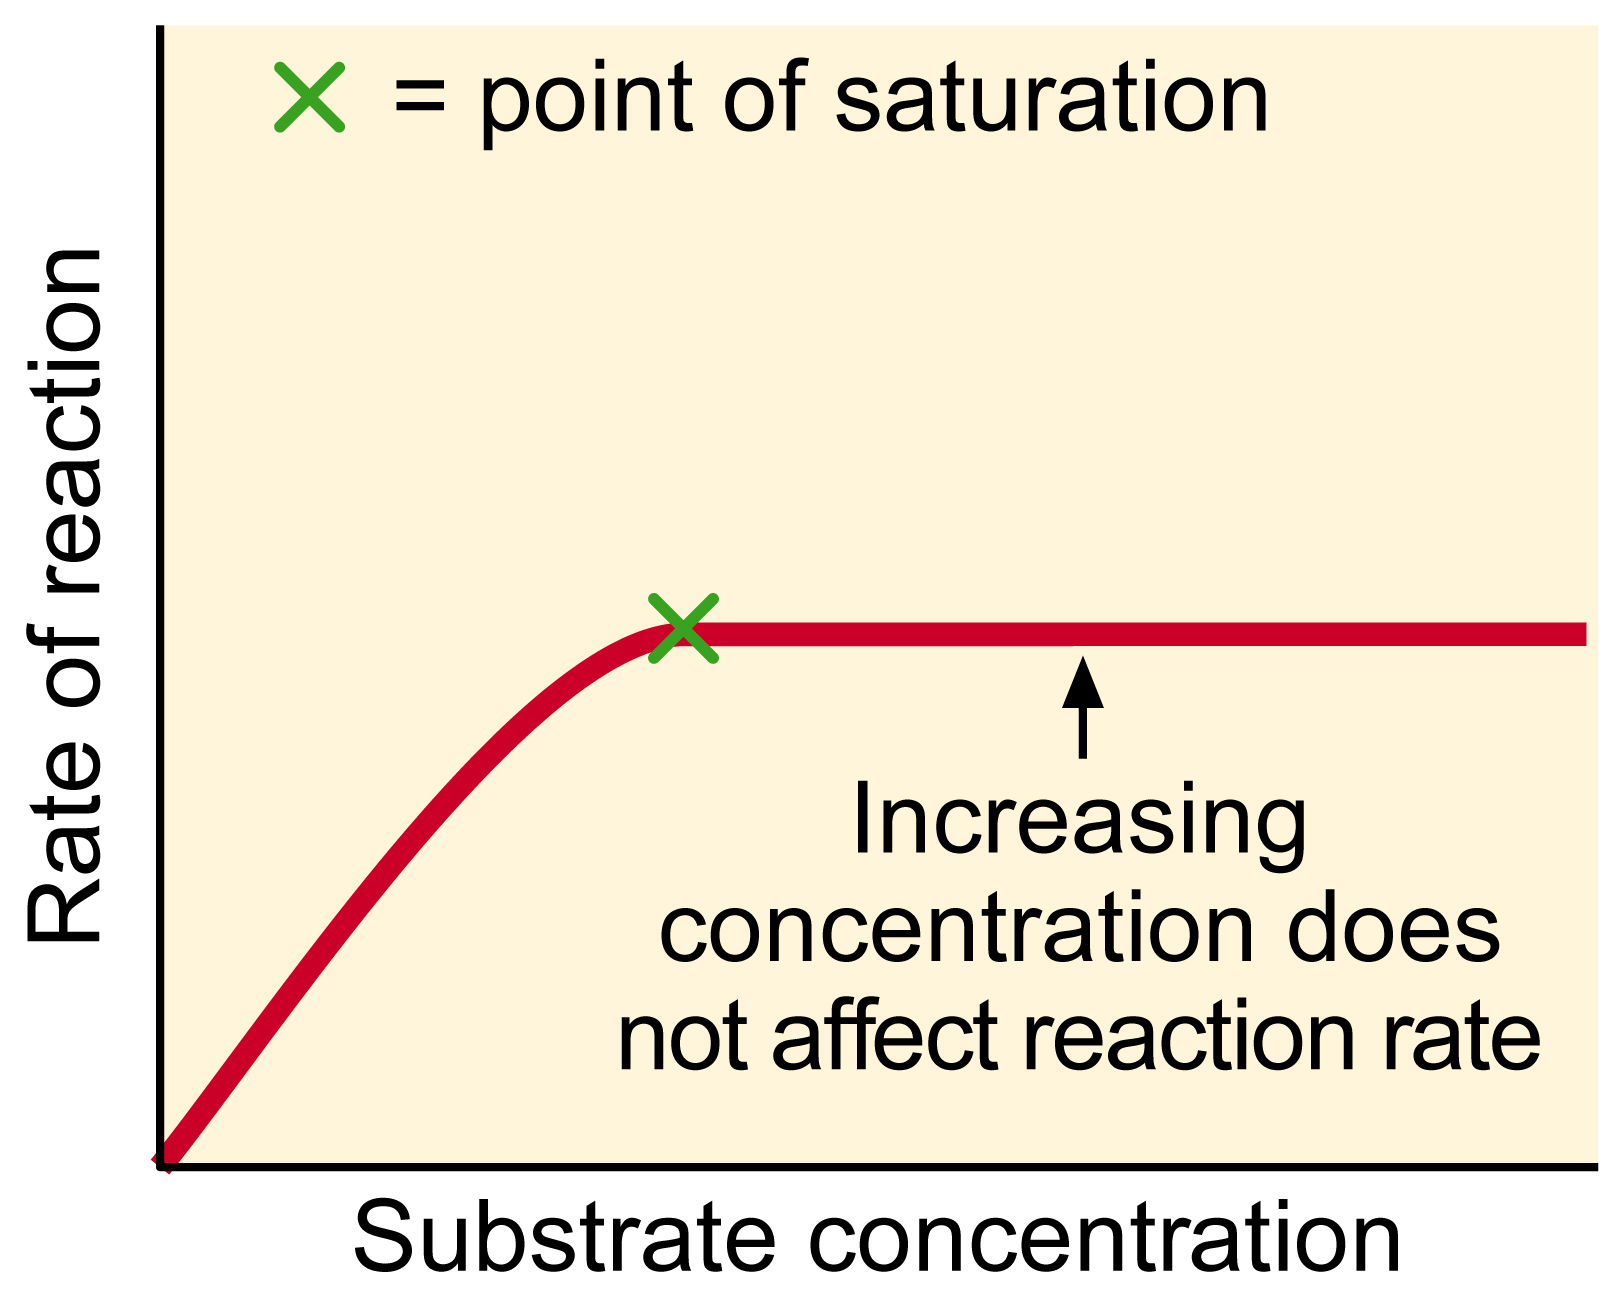 Laboratory 13: Determine the Effect of Concentration on Reaction Rate